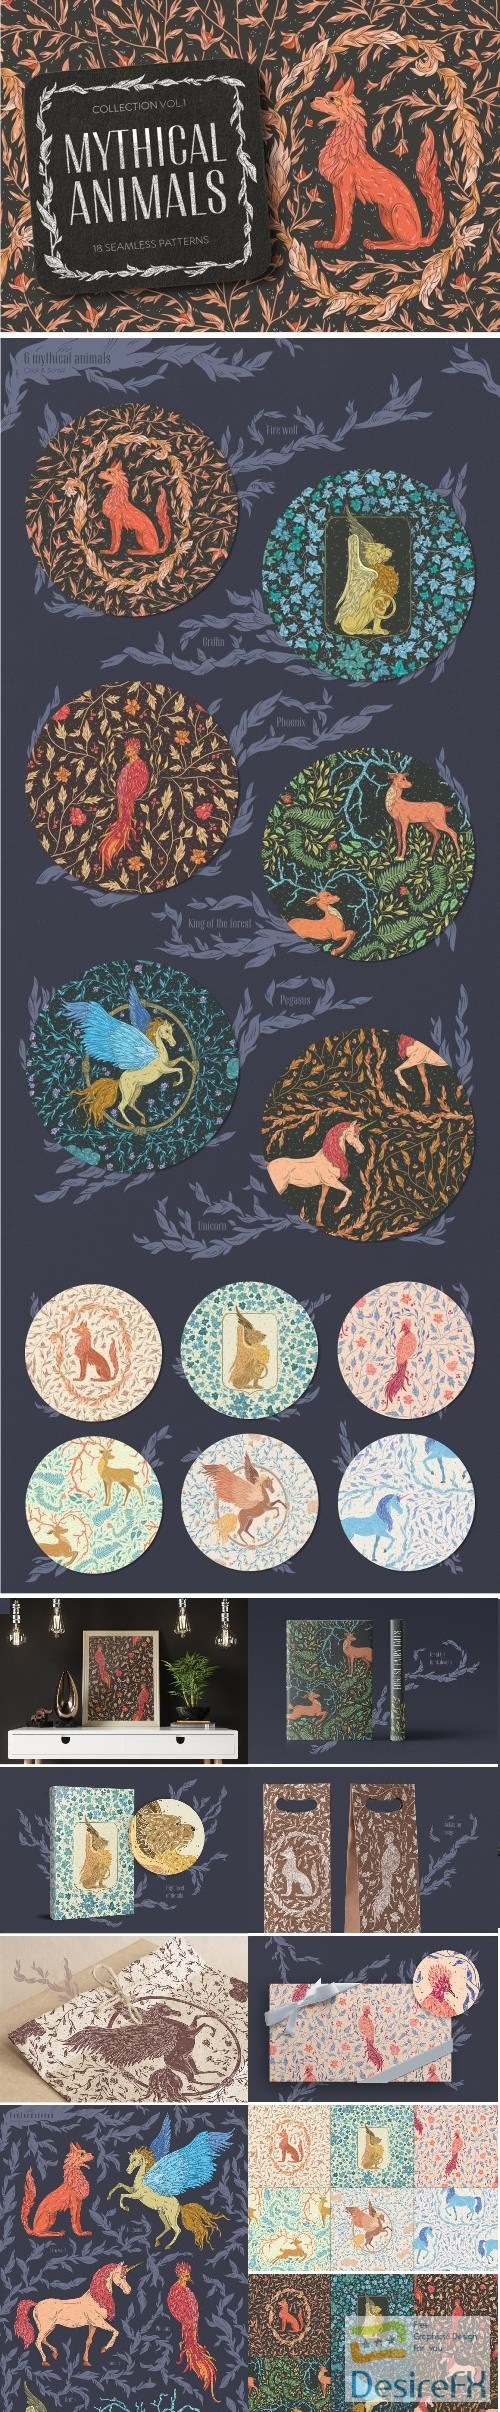 Mythical Animals patterns - 2380531